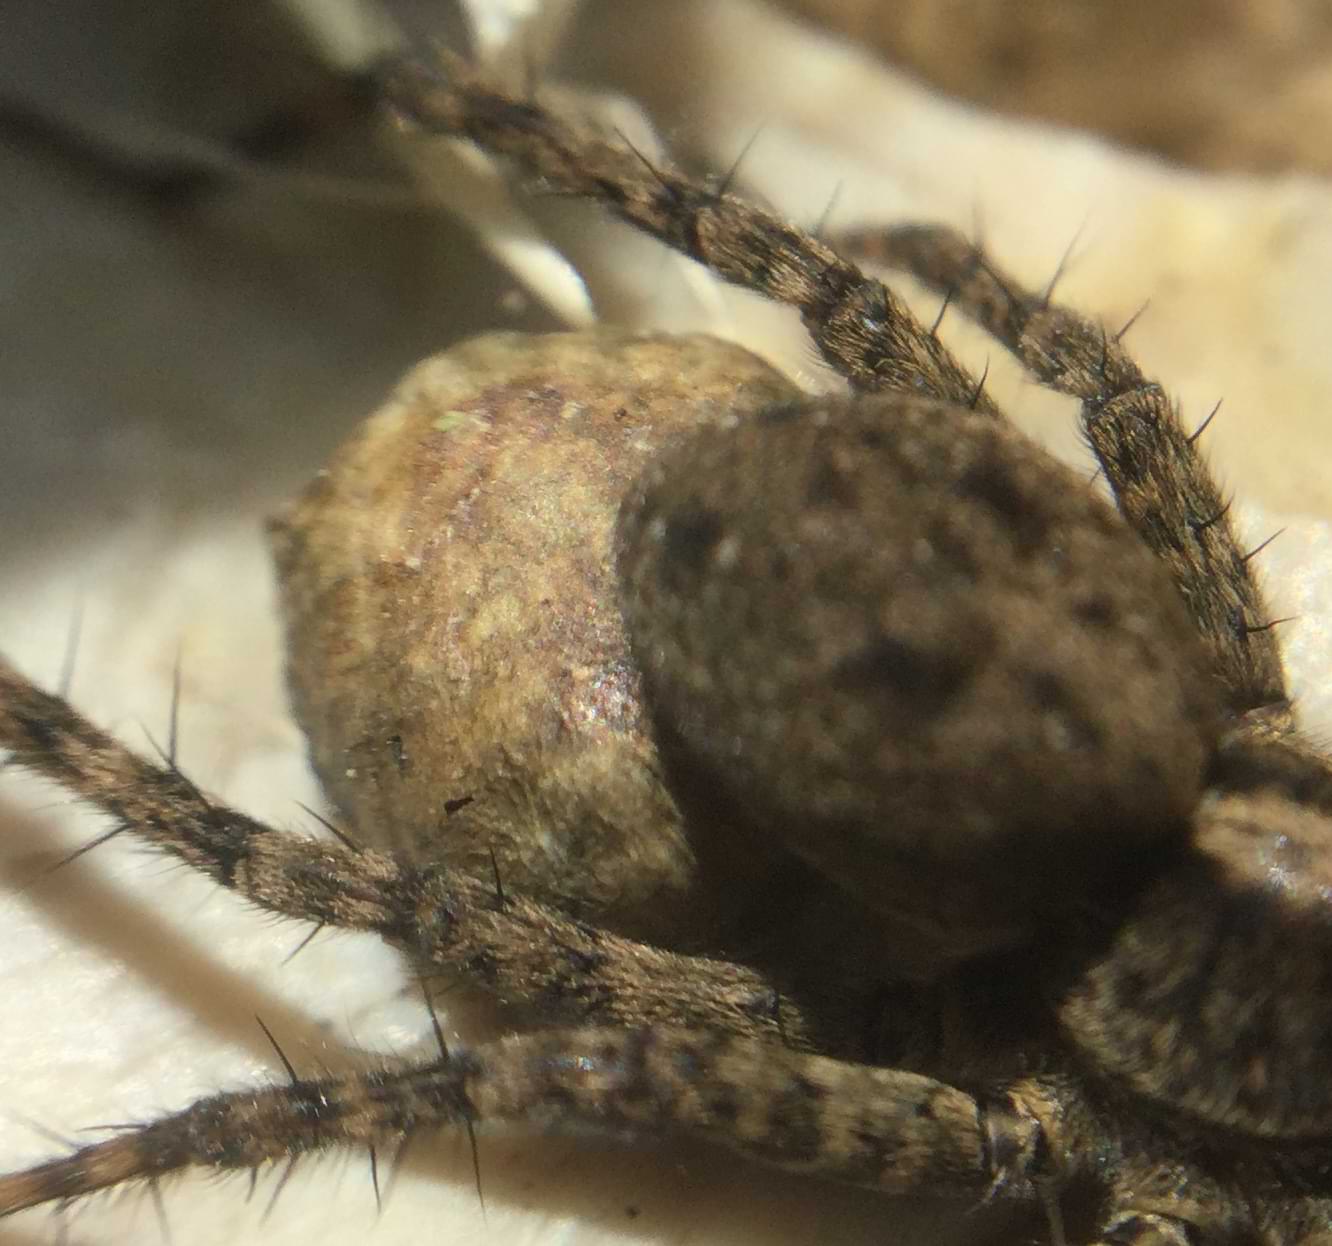 Close-up image of the spider's abdomen, which is holding onto a large round egg sac. The egg sac is a much lighter colour than spider but has patches of darker brown colouration on its surface.